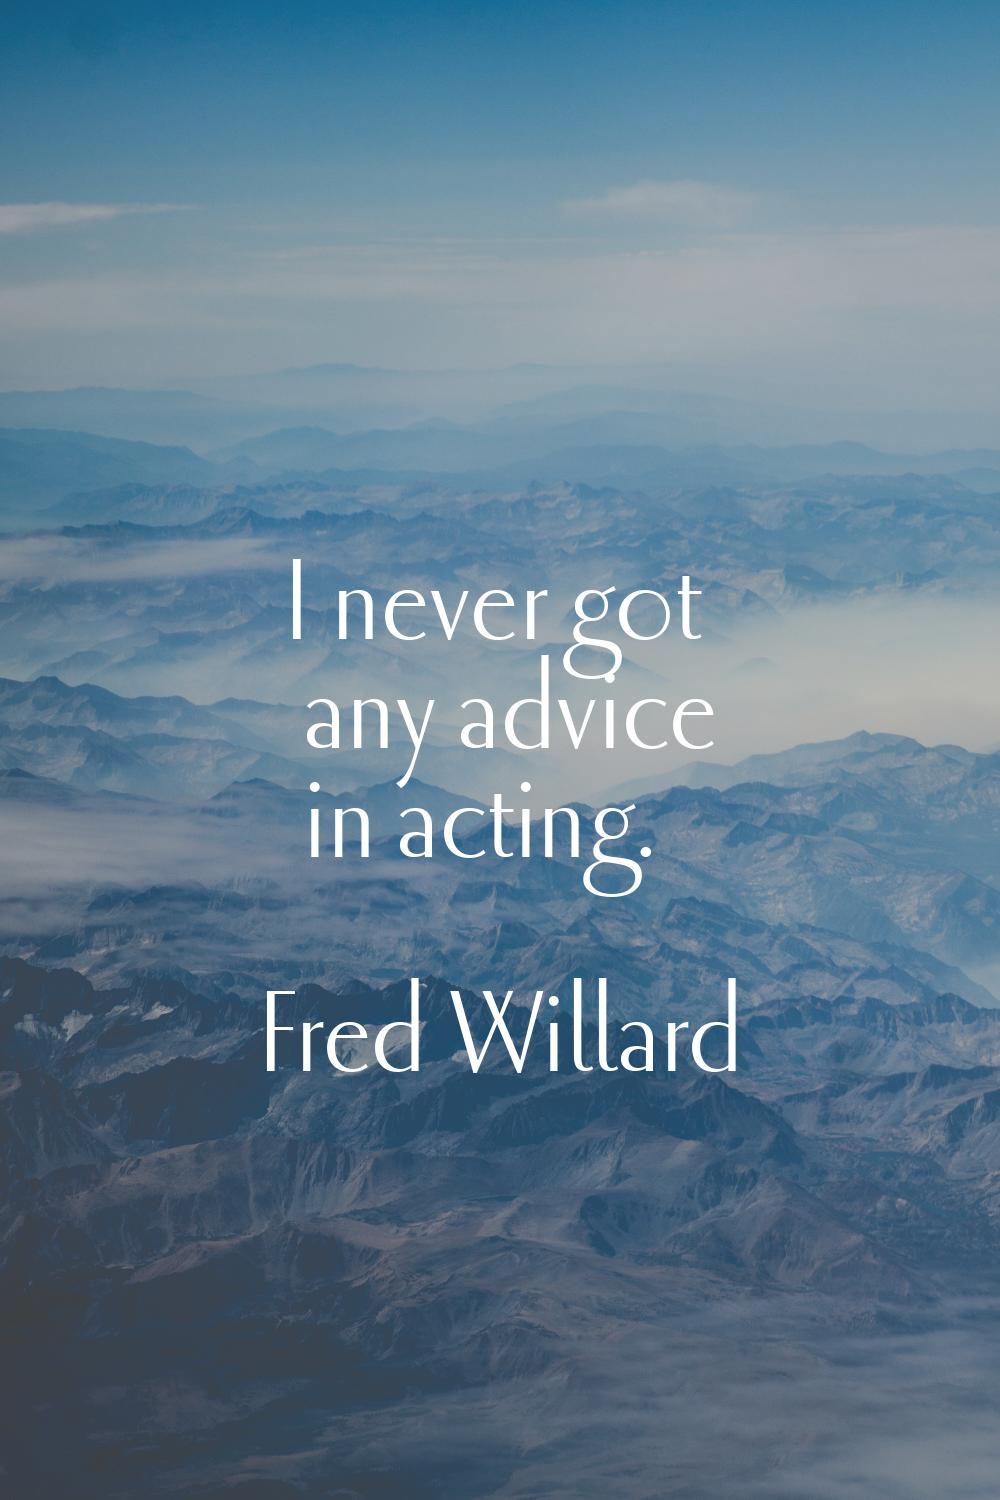 I never got any advice in acting.